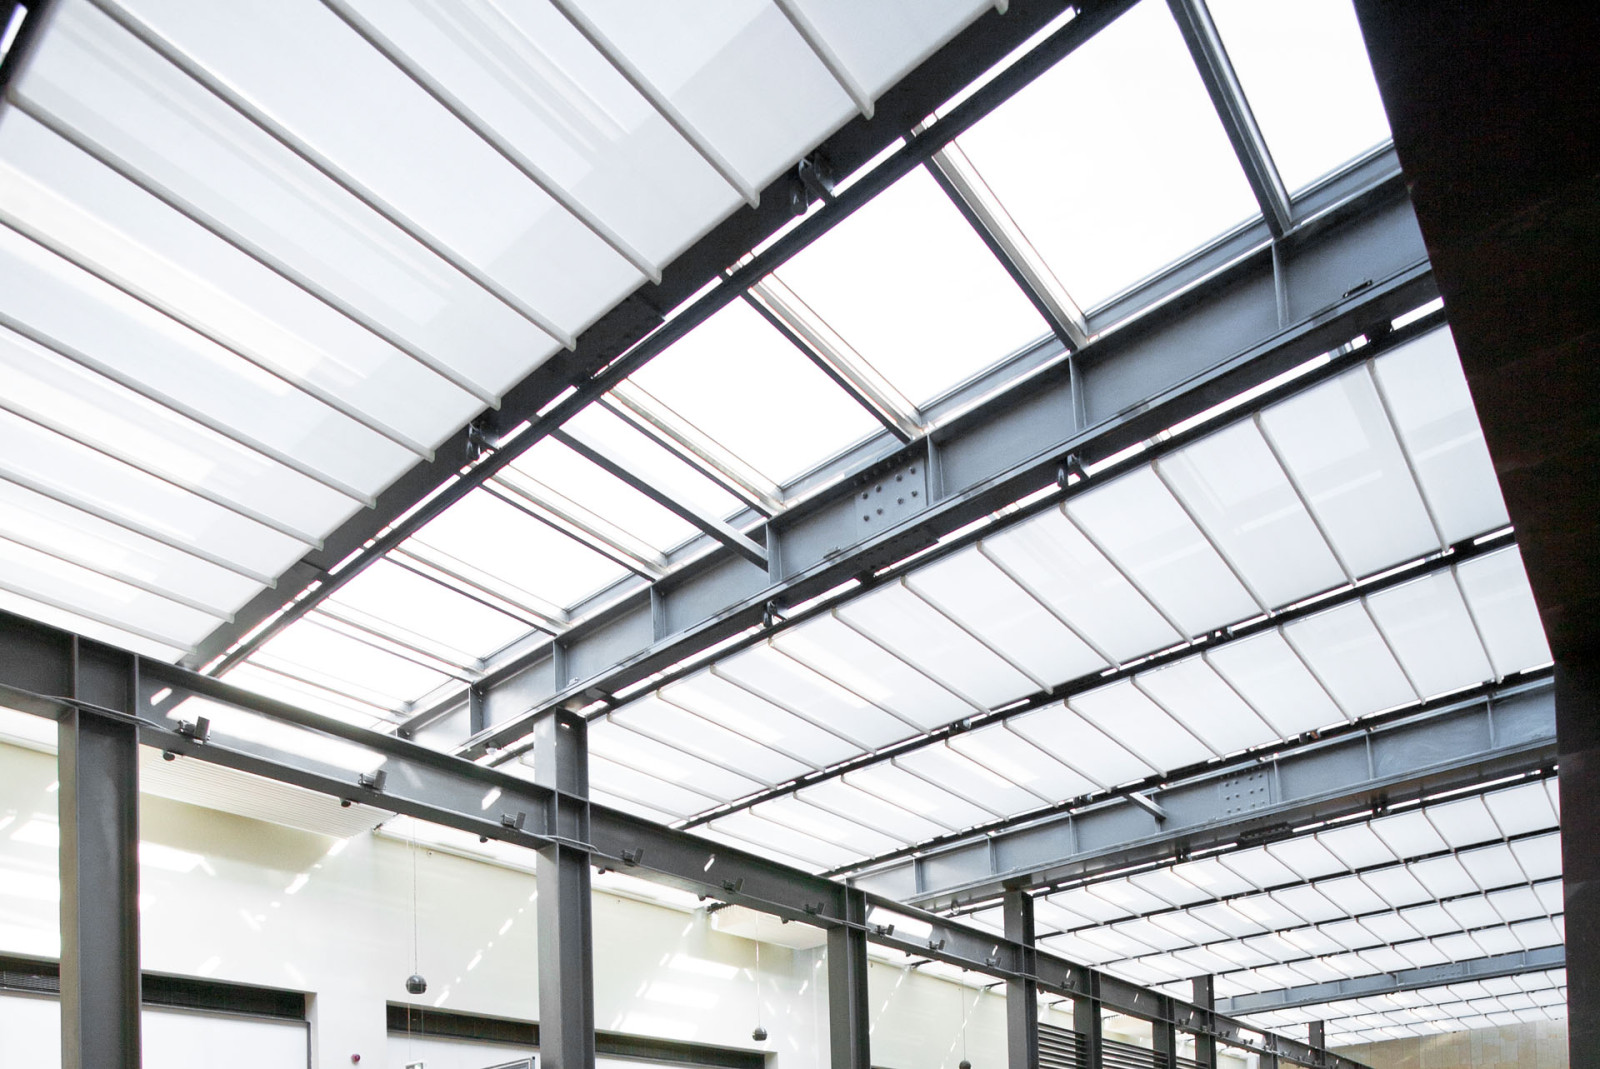 A spacious interior with a massive metal and tailor made fabric pergola roof.